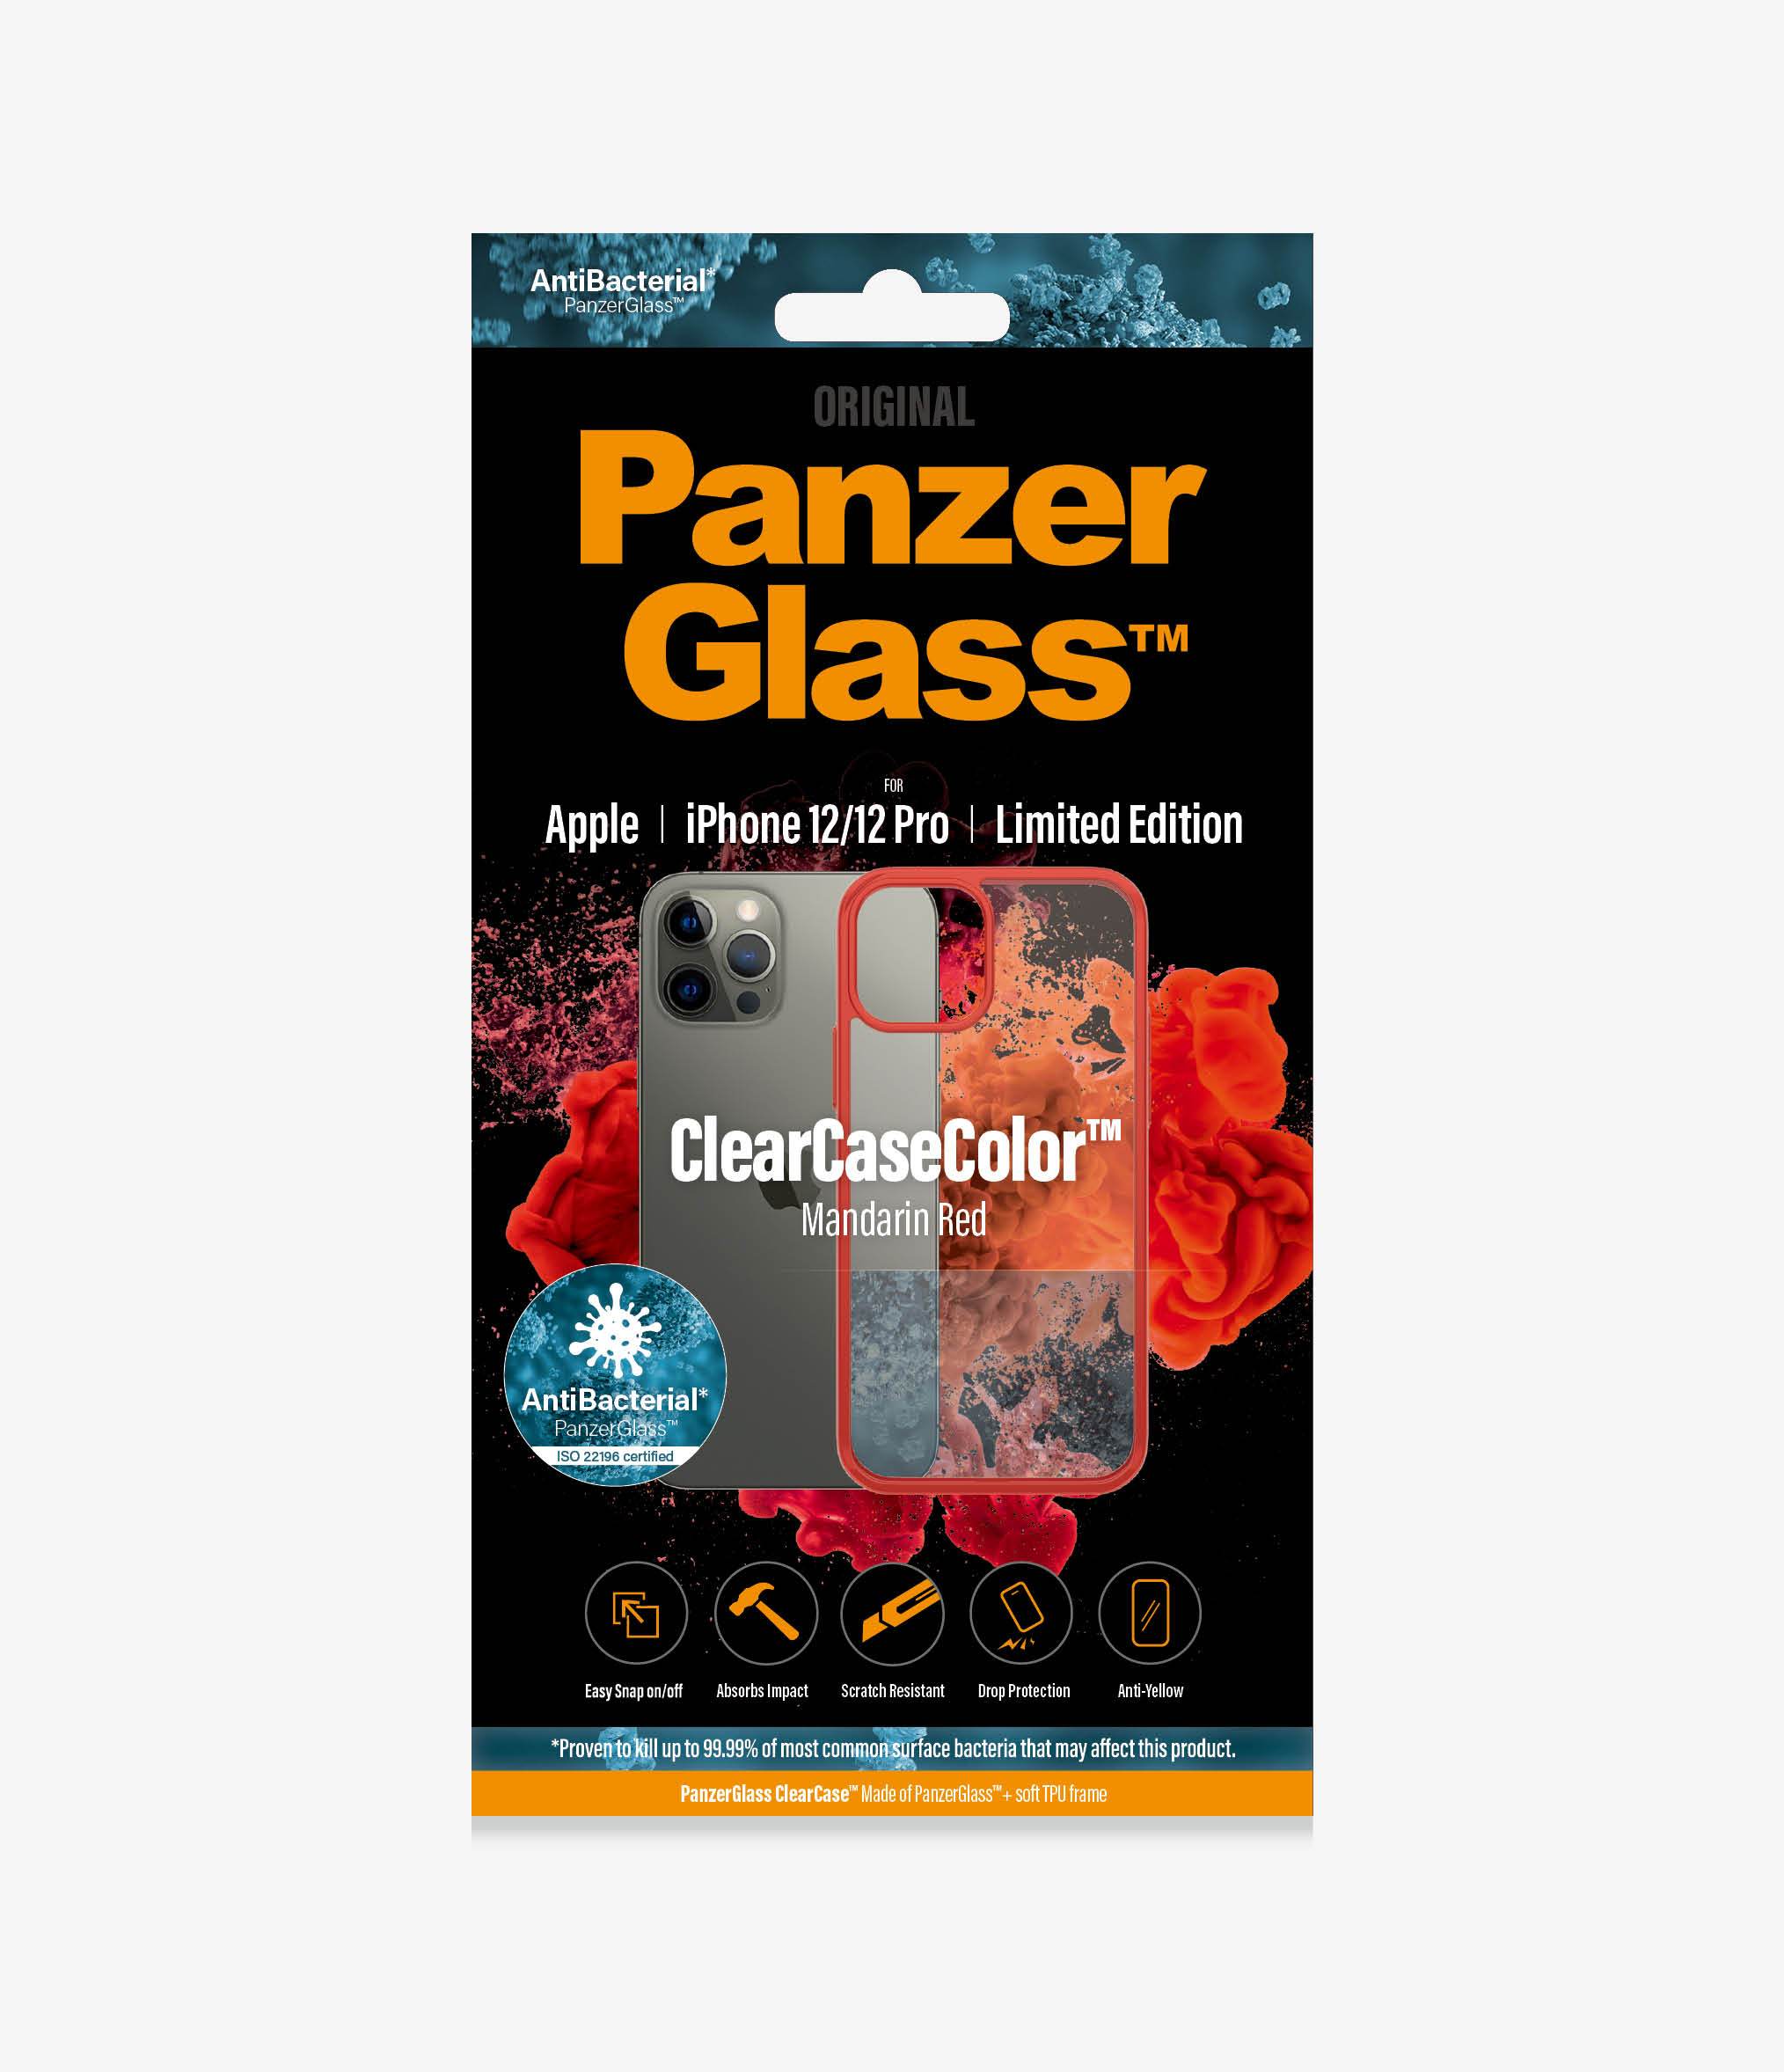 PanzerGlass™ ClearCaseColor™ Apple iPhone 12/12 Pro - Mandarin Red Limited Edition (0280), Slim fashionable design, Tempered anti-aging glass back